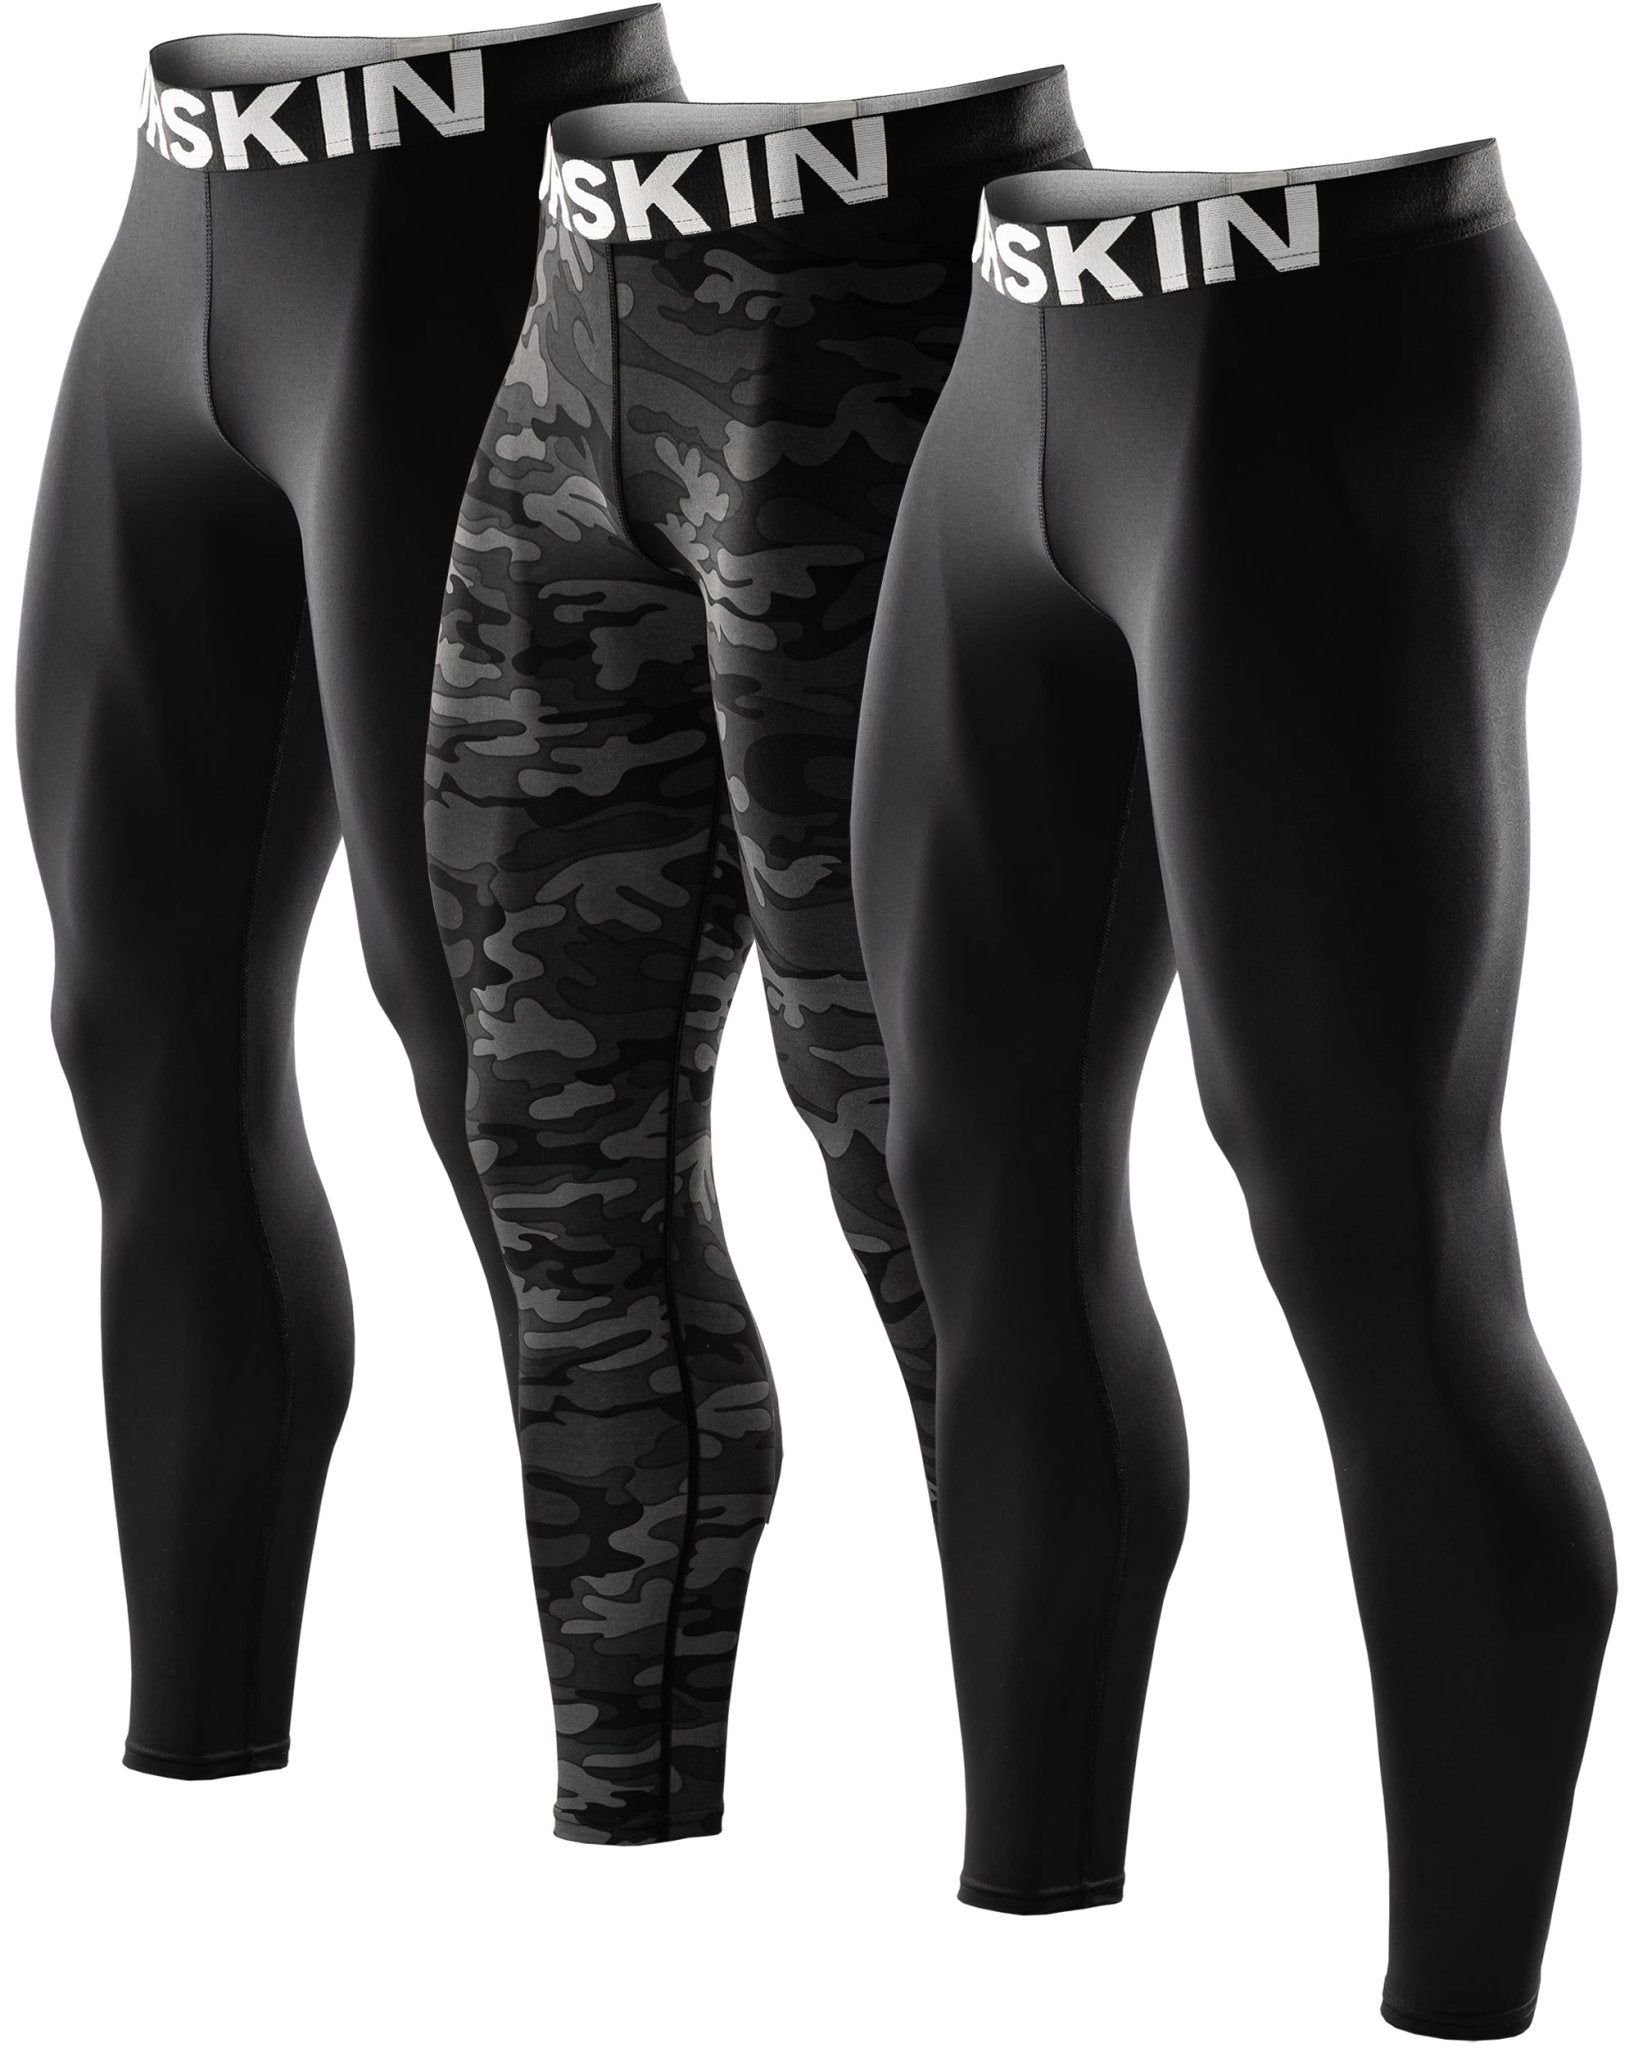 Powergear Dry Fit Standard Compression Pants 3Pack(Black 2p+camoBlack 1p) - DRSKINSPORTS